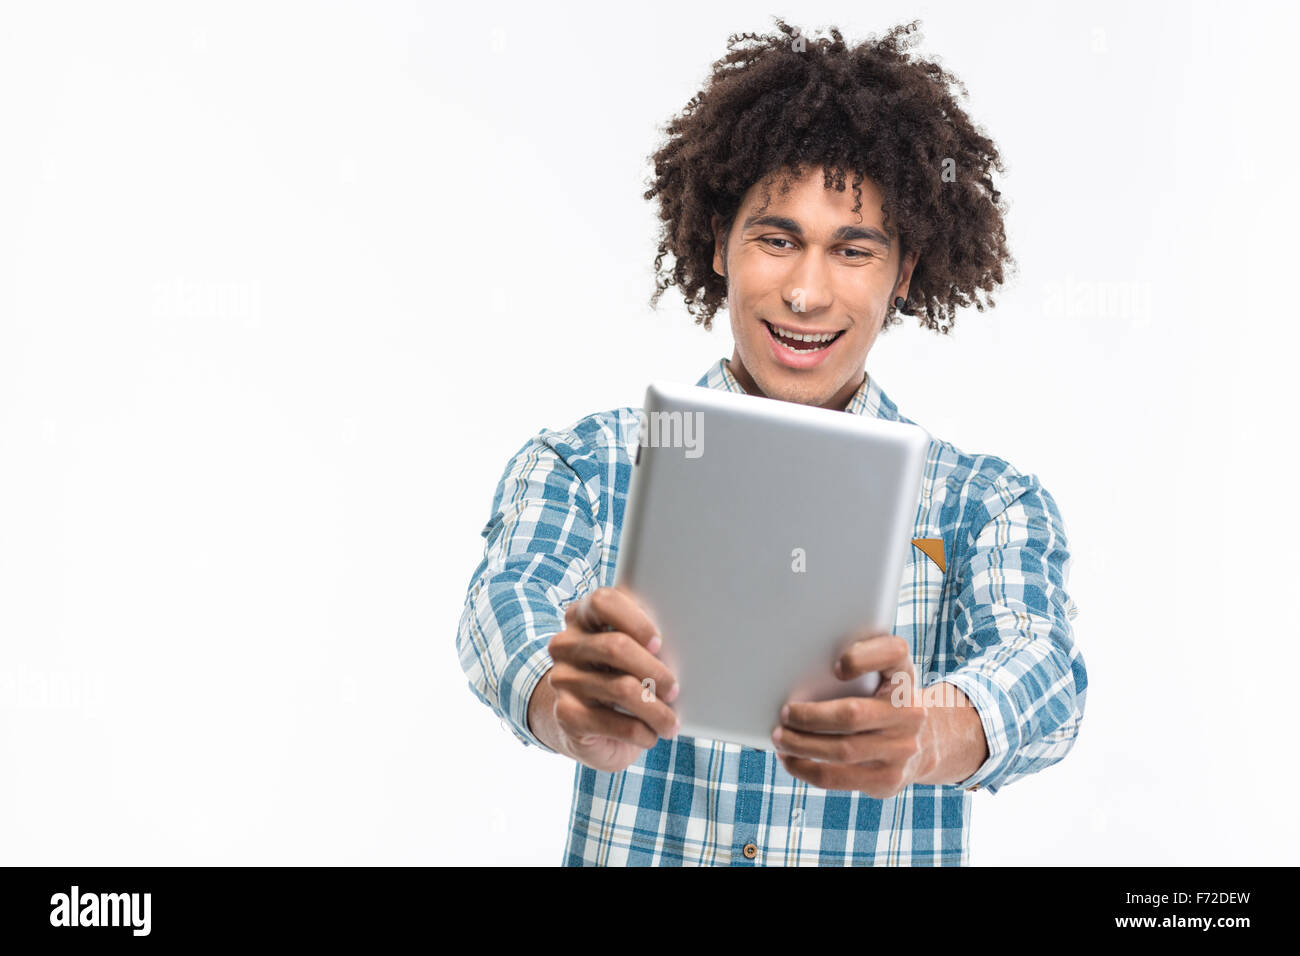 Portrait of a cheerful afro american man using tablet computer isolated on a white background Stock Photo